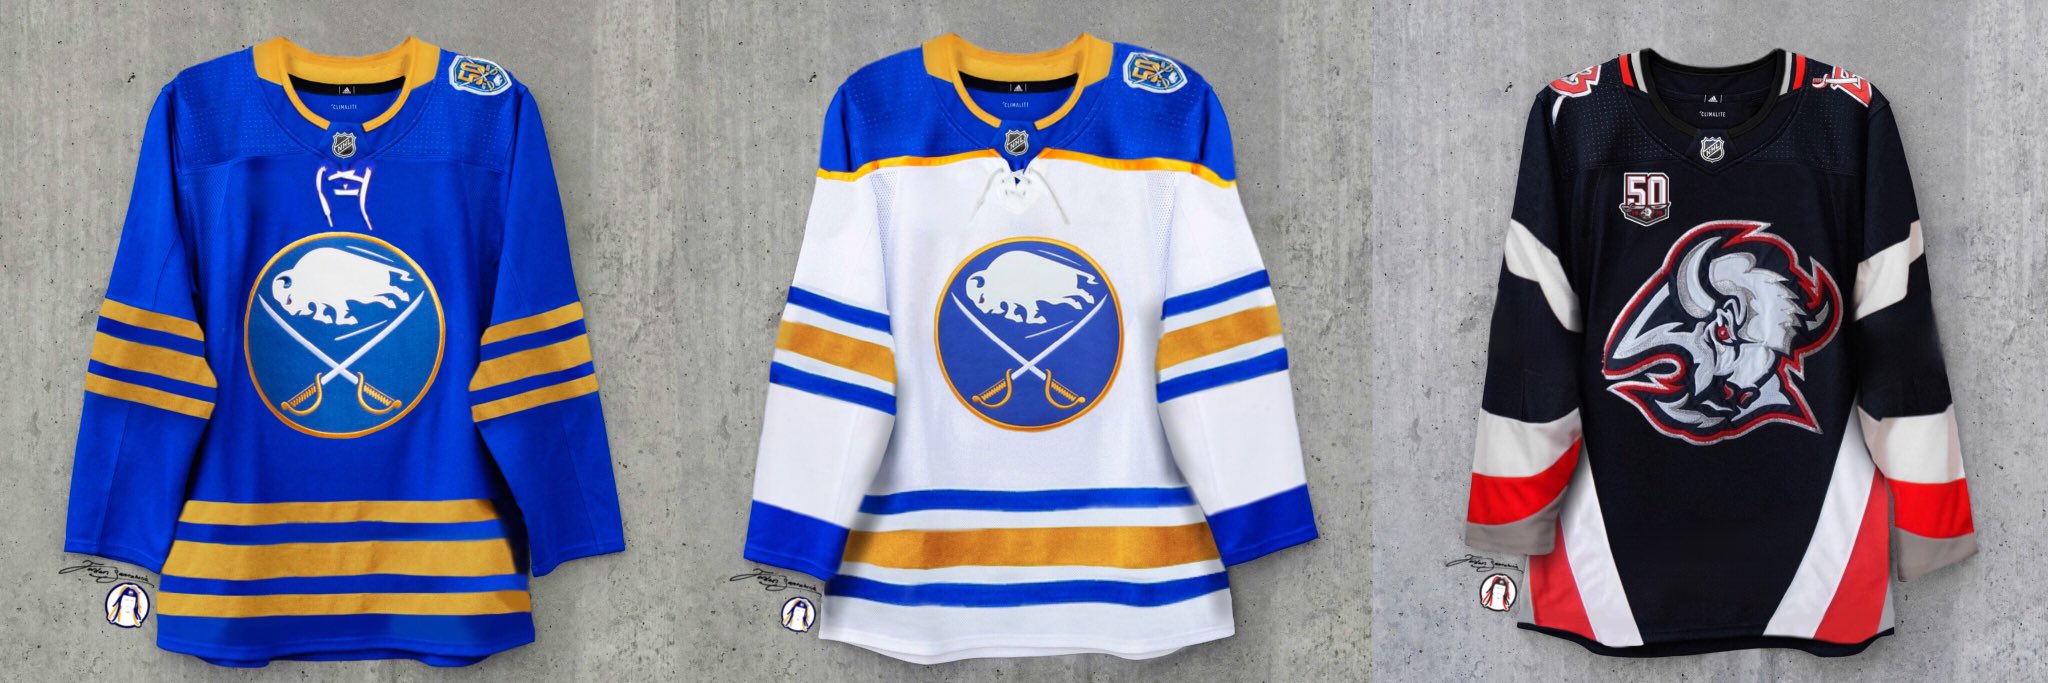 Buffalo Sabres jersey concepts inspired by their 50th anniversary jerseys :  r/hockey